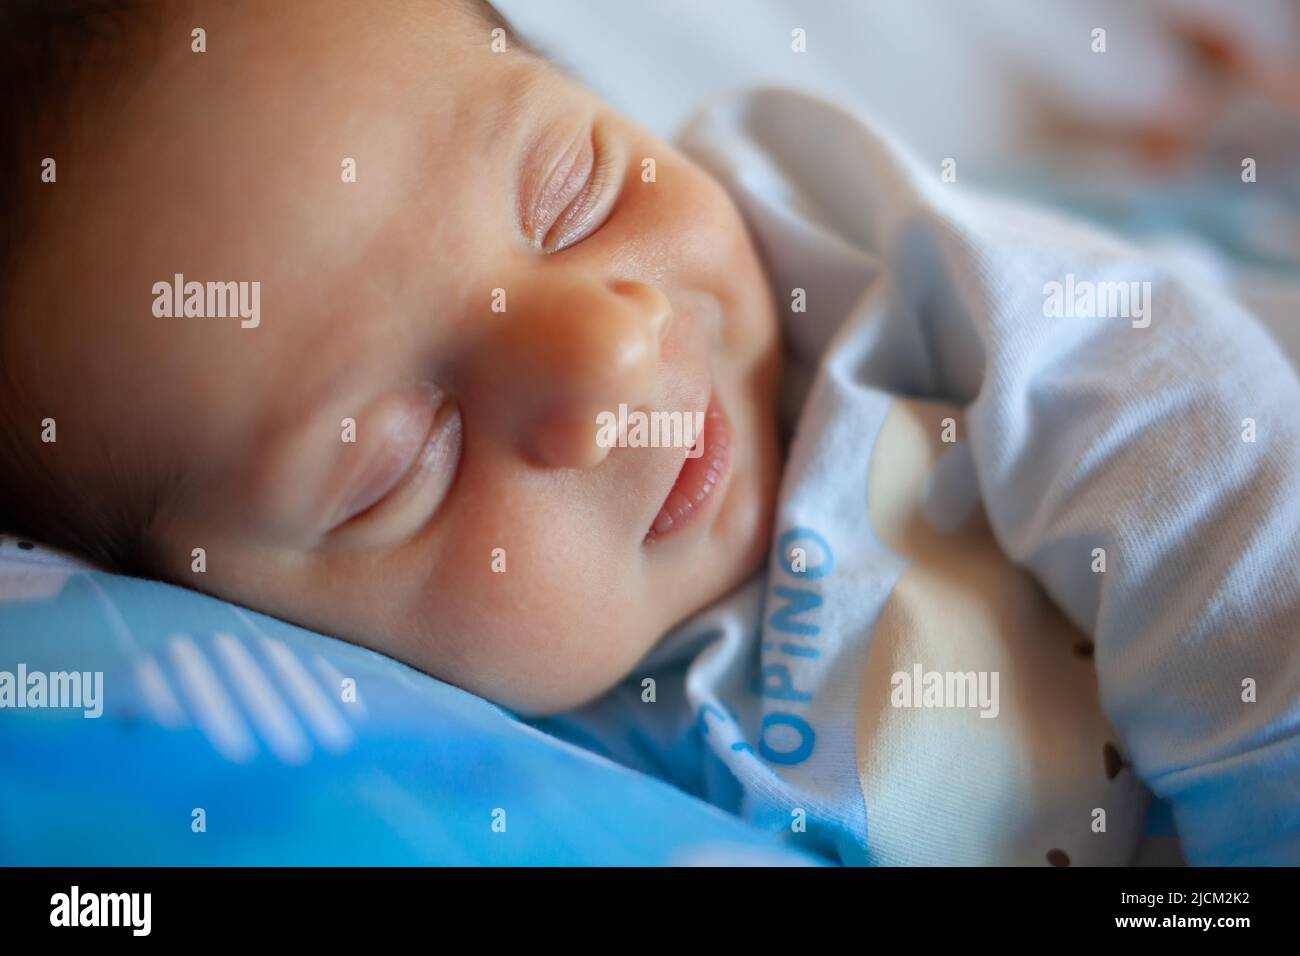 A few days old baby sleeps on a round pillow. The sleep phase is very important in childhood. Stock Photo